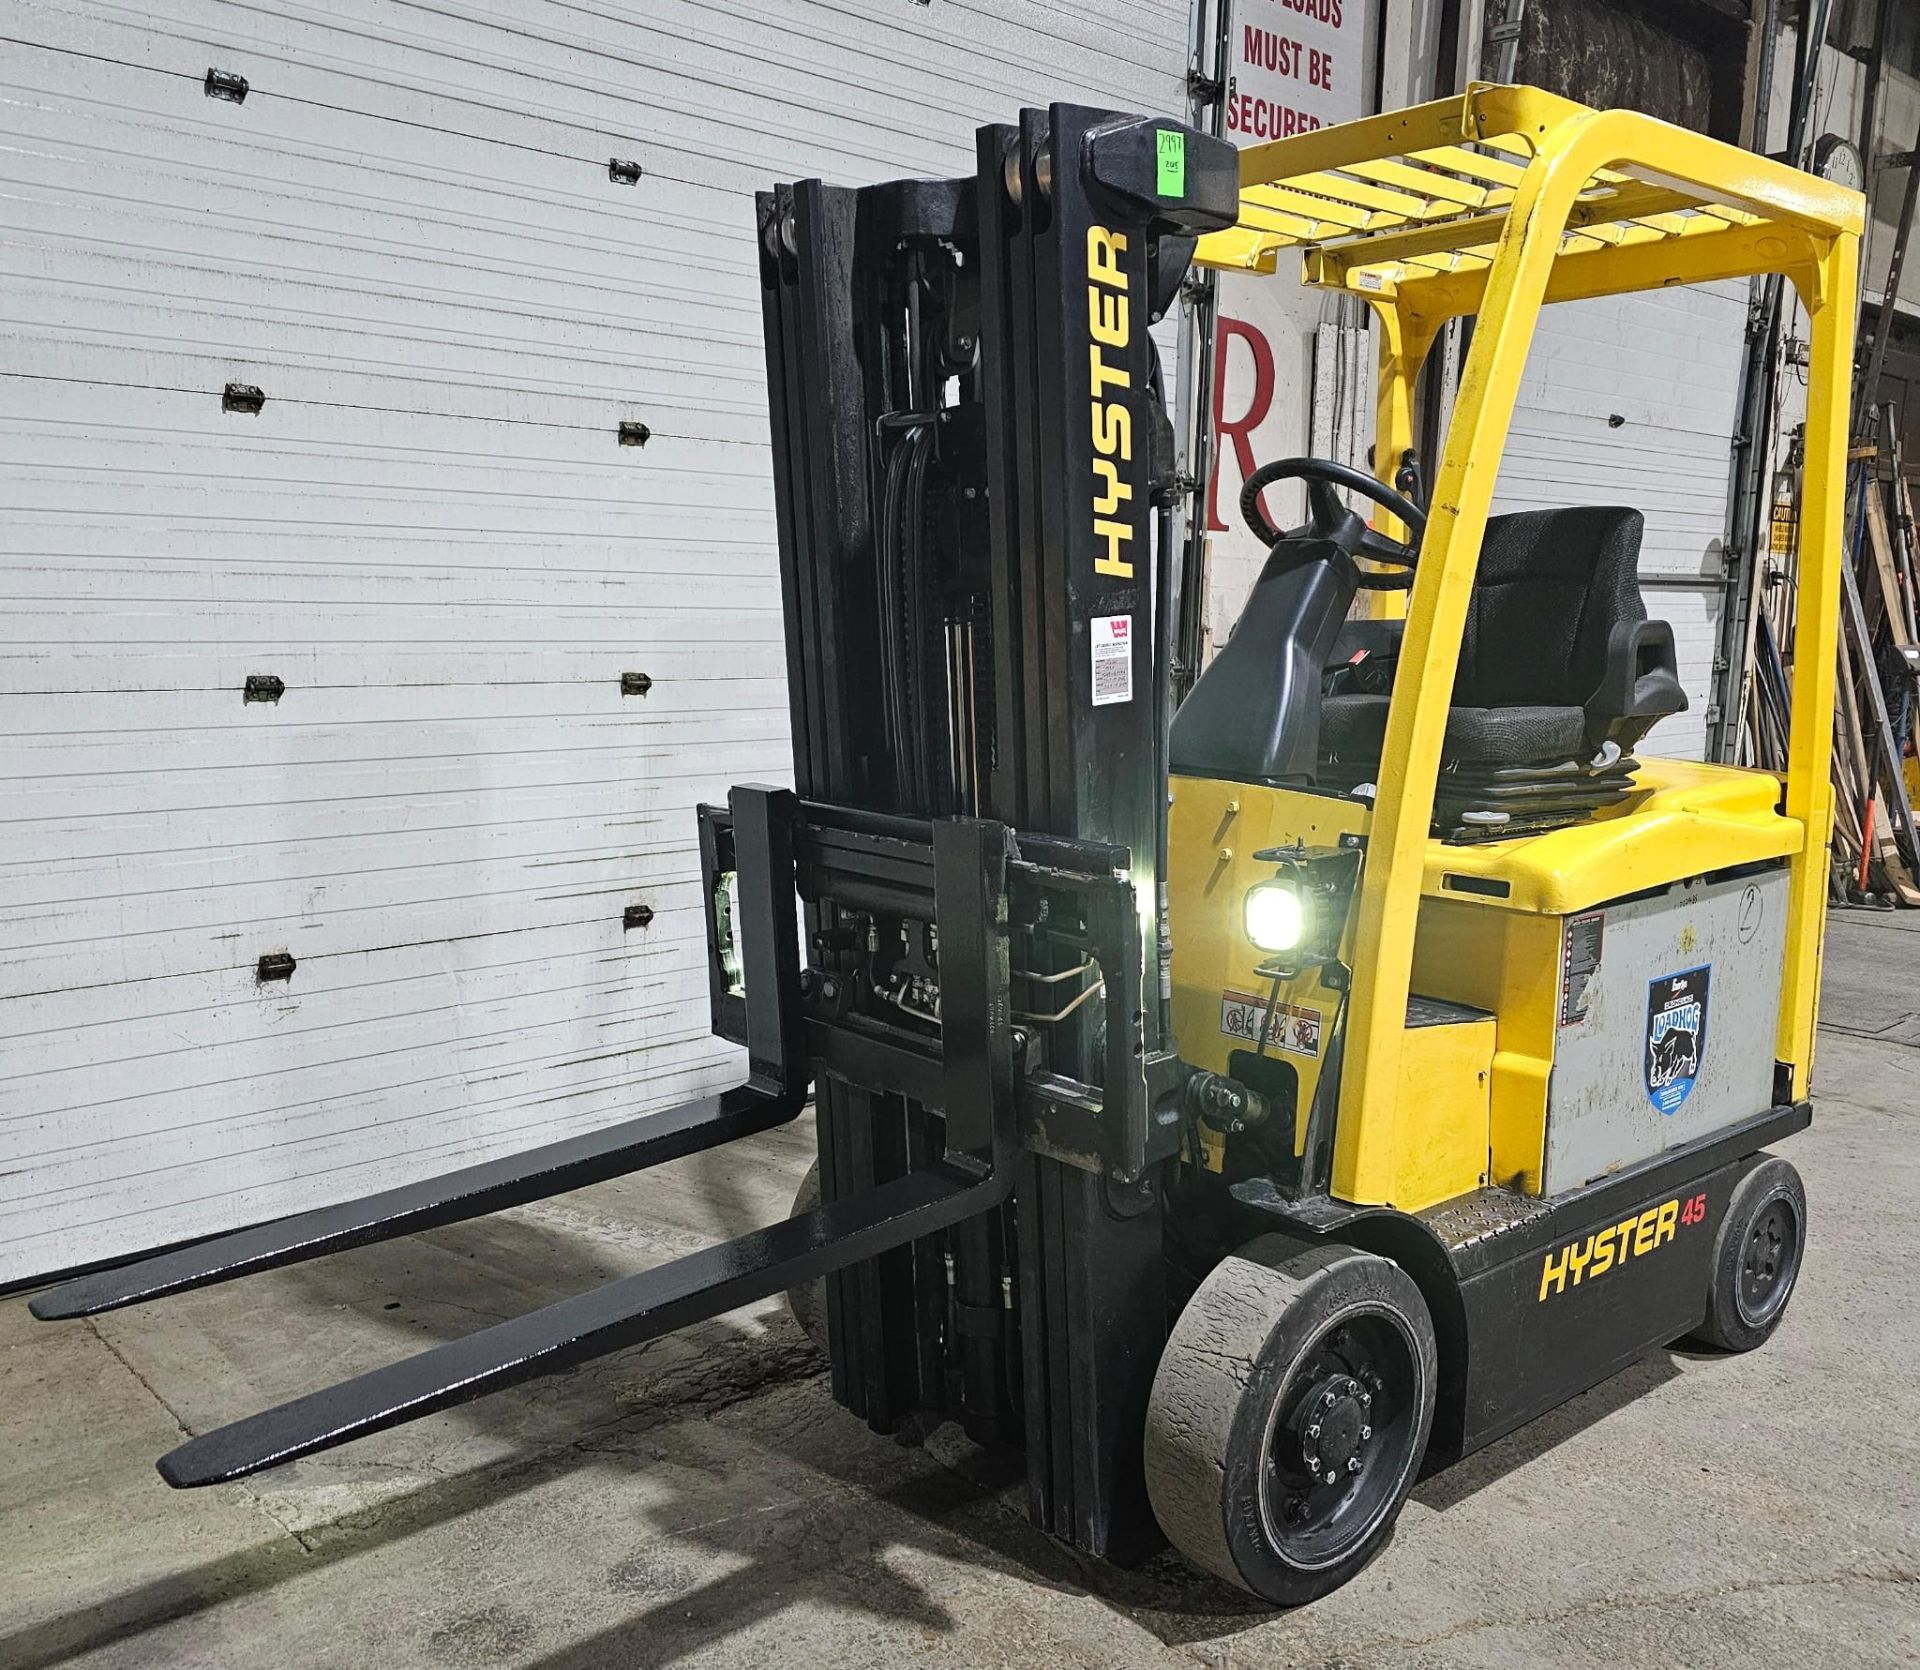 2015 Hyster 4,500lbs Capacity Forklift Electric 48V with sideshift & 3-STAGE MAST 189" load height - Image 3 of 5